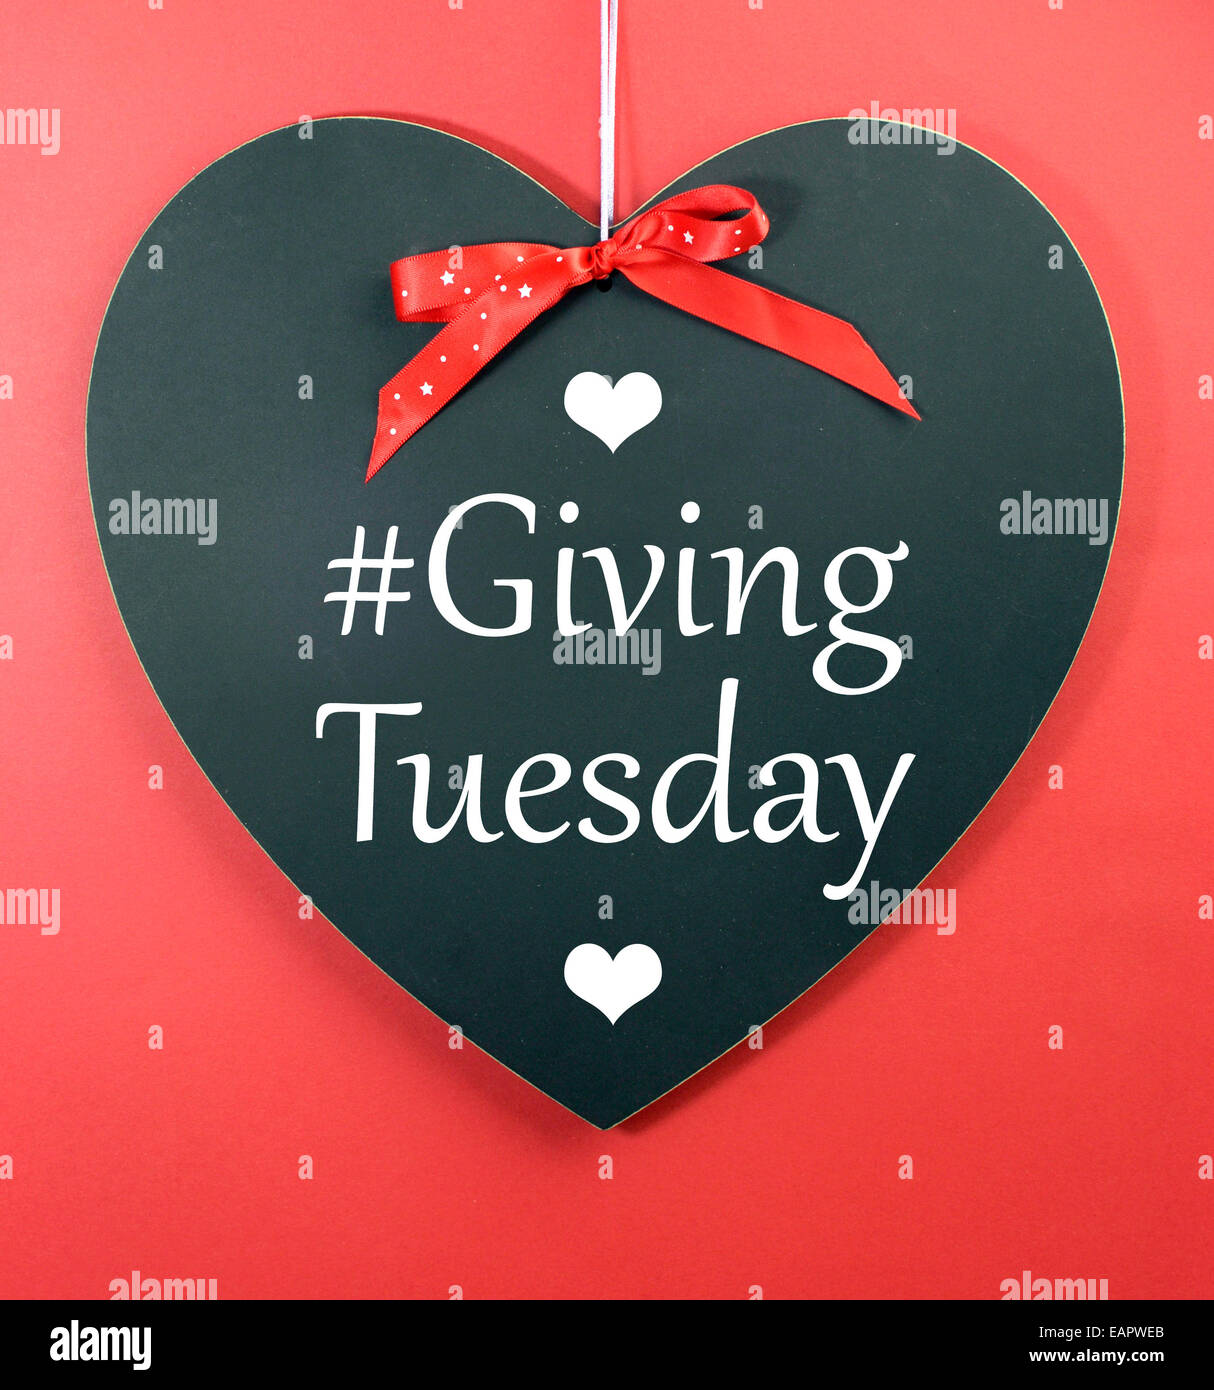 Giving Tuesday message greeting on black heart shape blackboard against a red background. Stock Photo